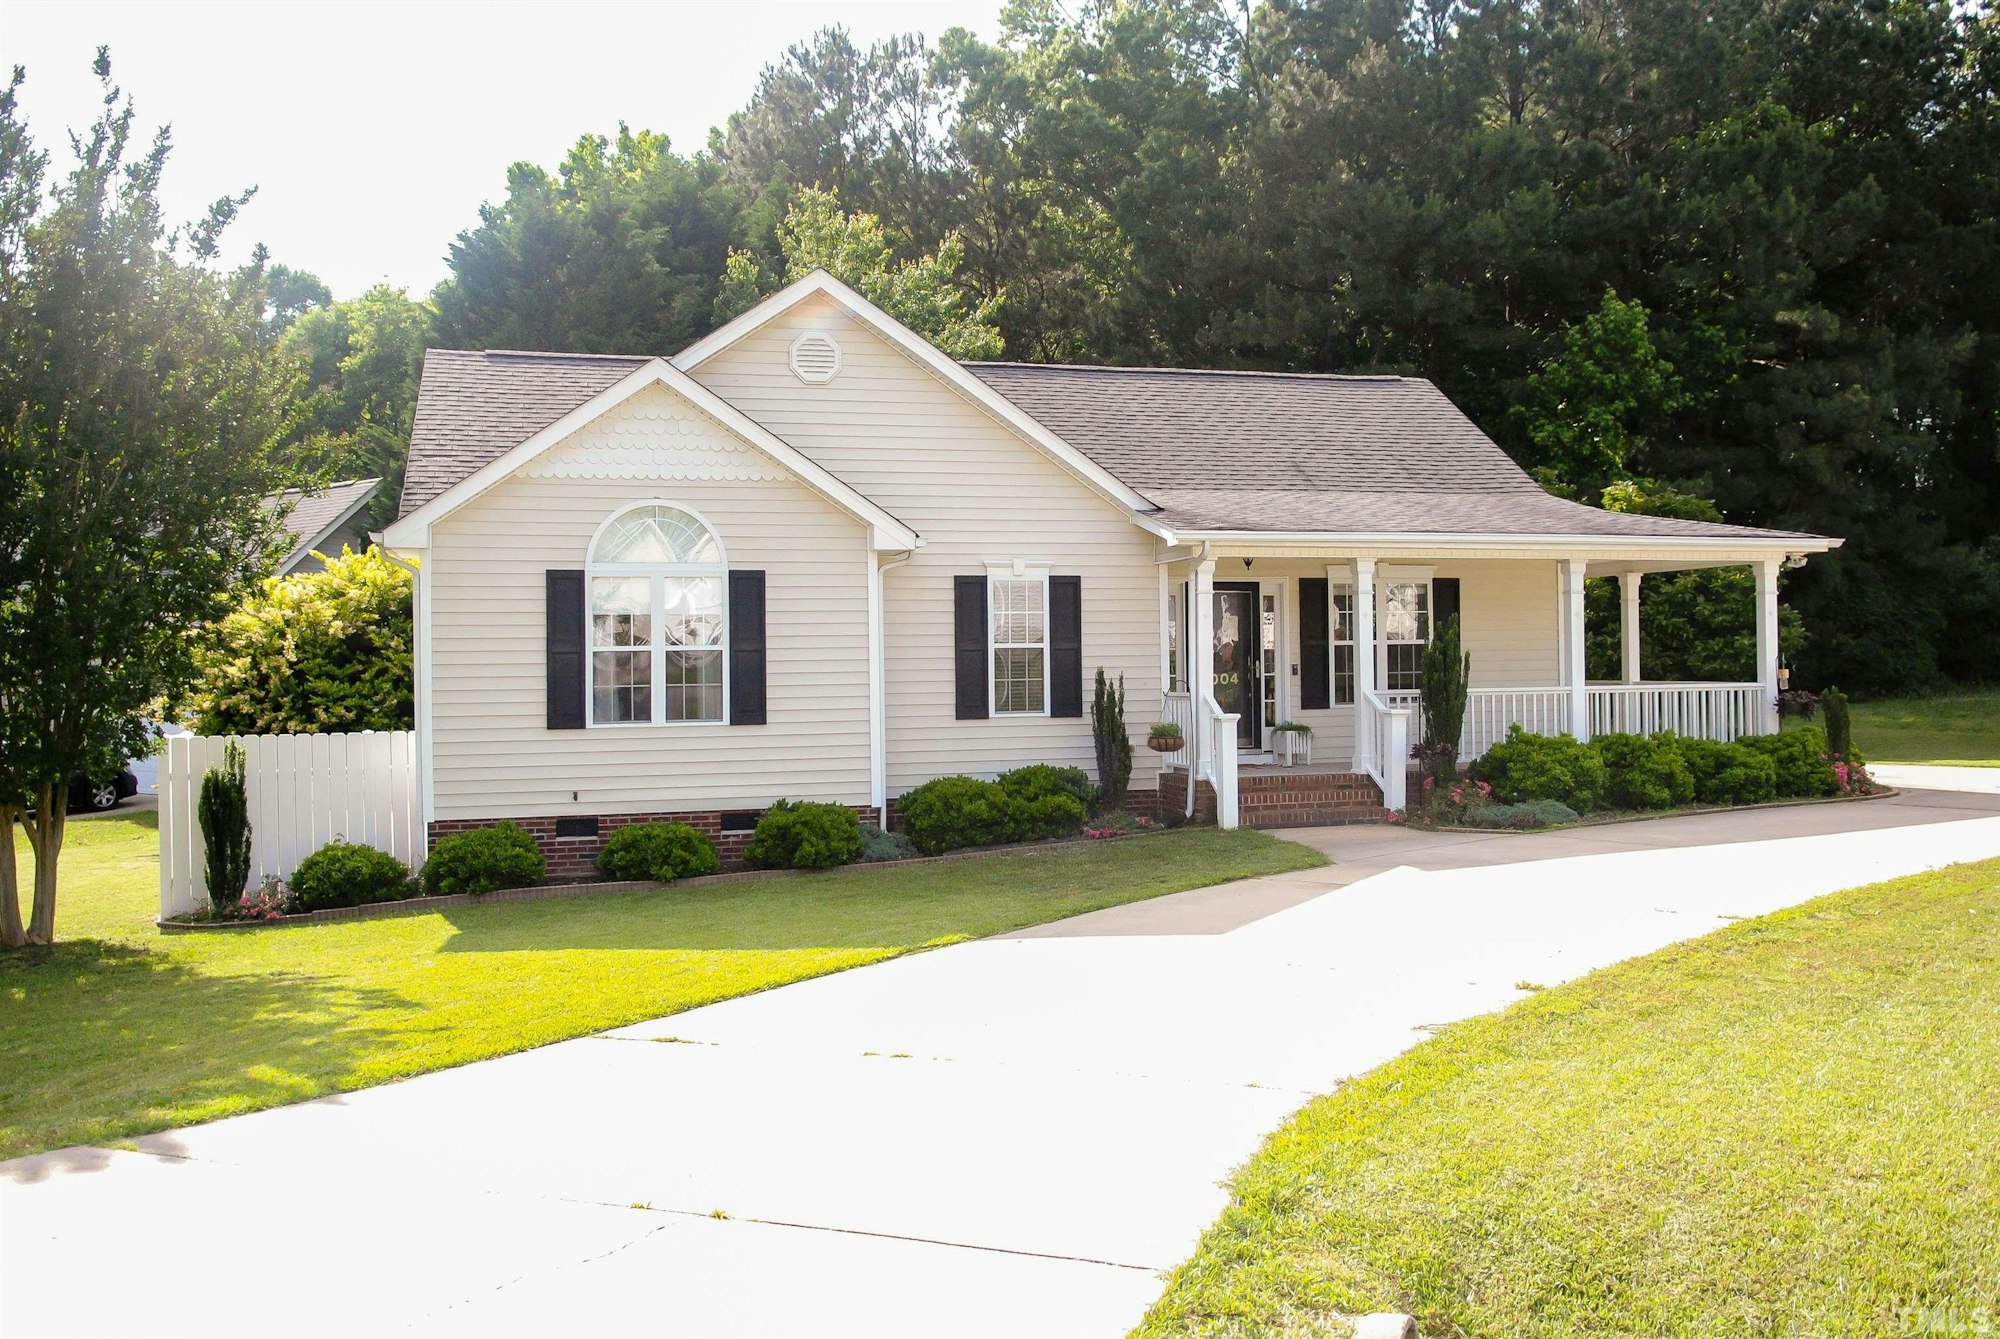 Photo 1 of 26 - 1004 Knighthood Ln, Knightdale, NC 27545